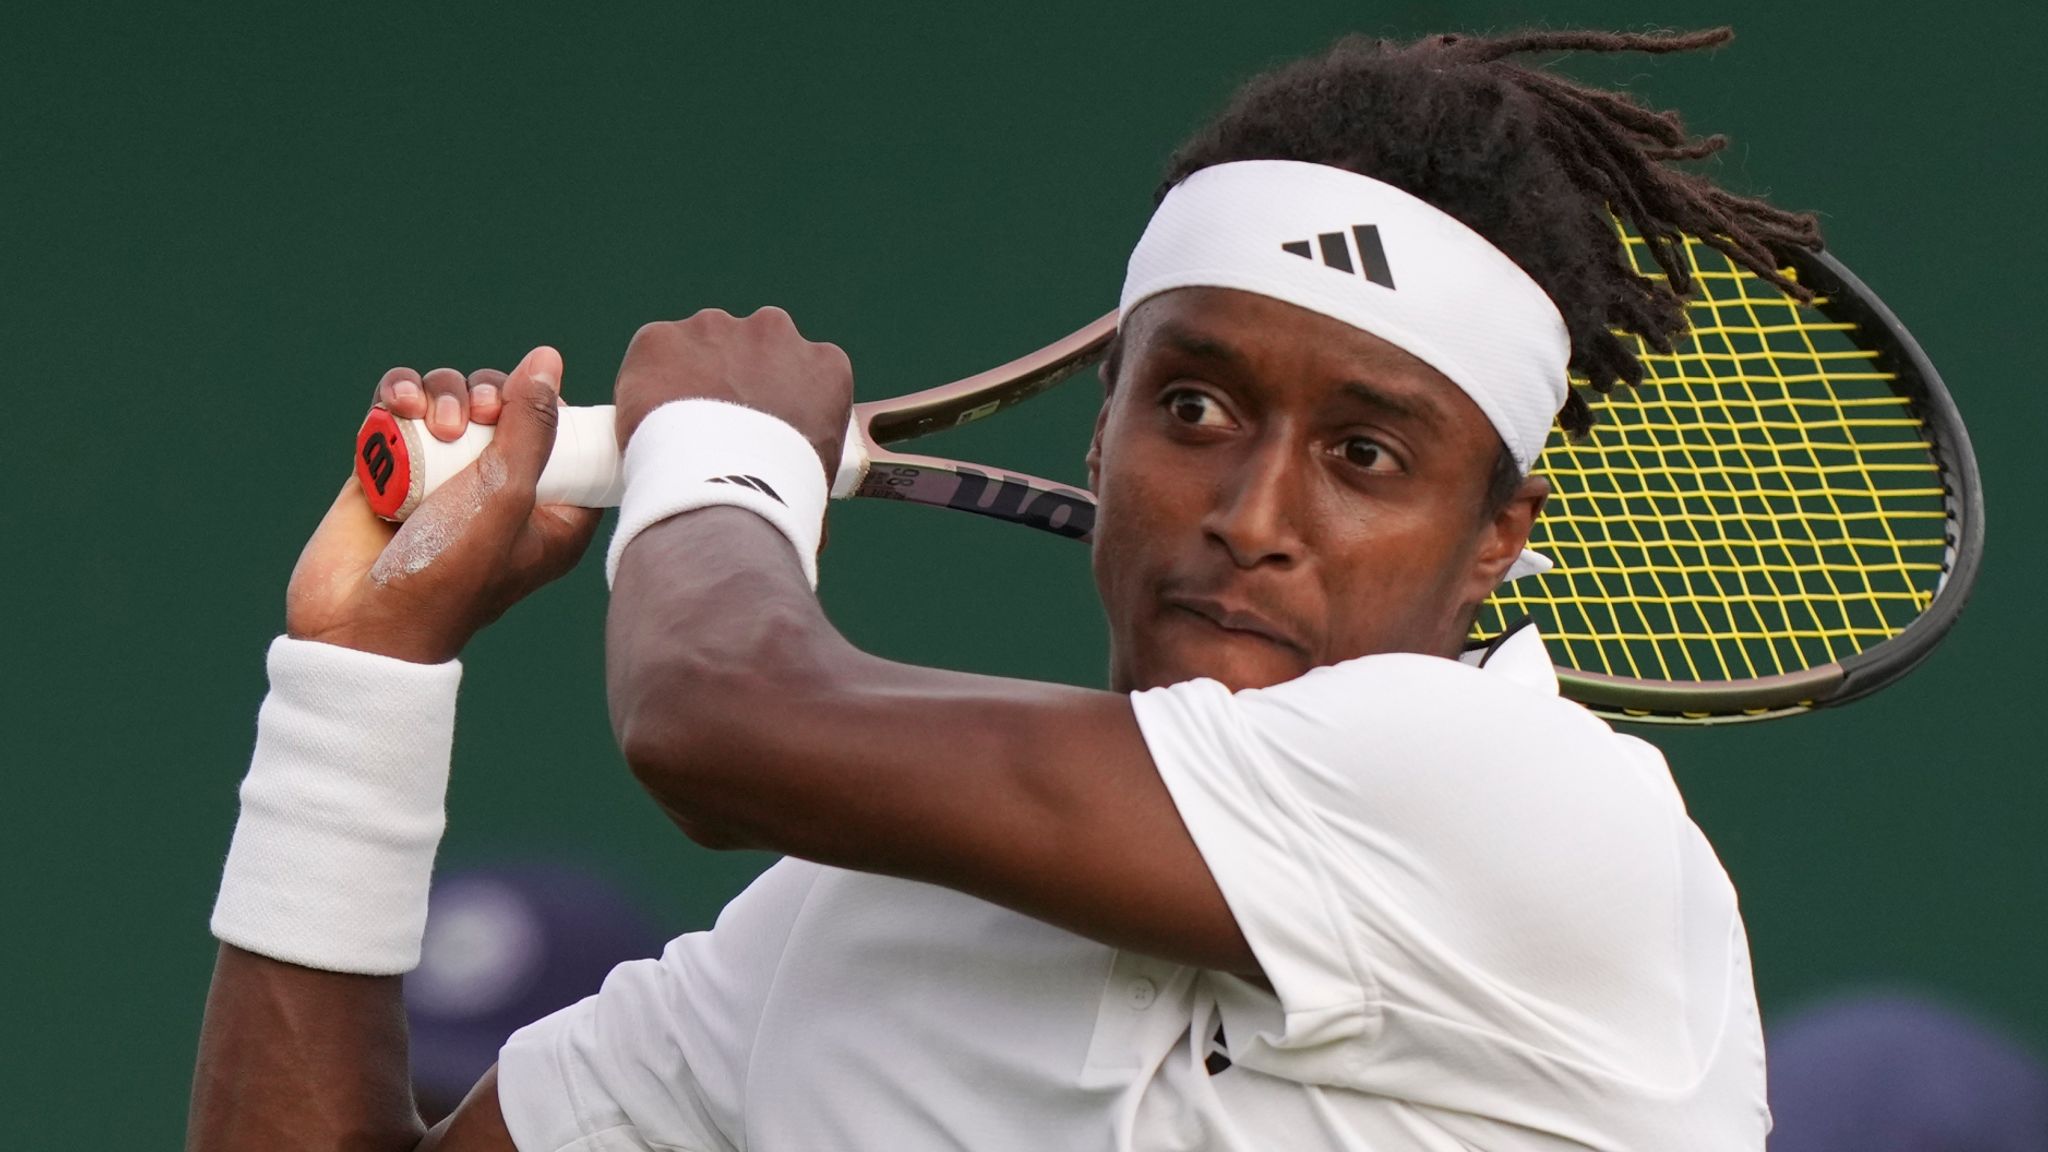 Swedish tennis player Mikael Ymer suspended for 18 months for whereabouts failures Tennis News Sky Sports